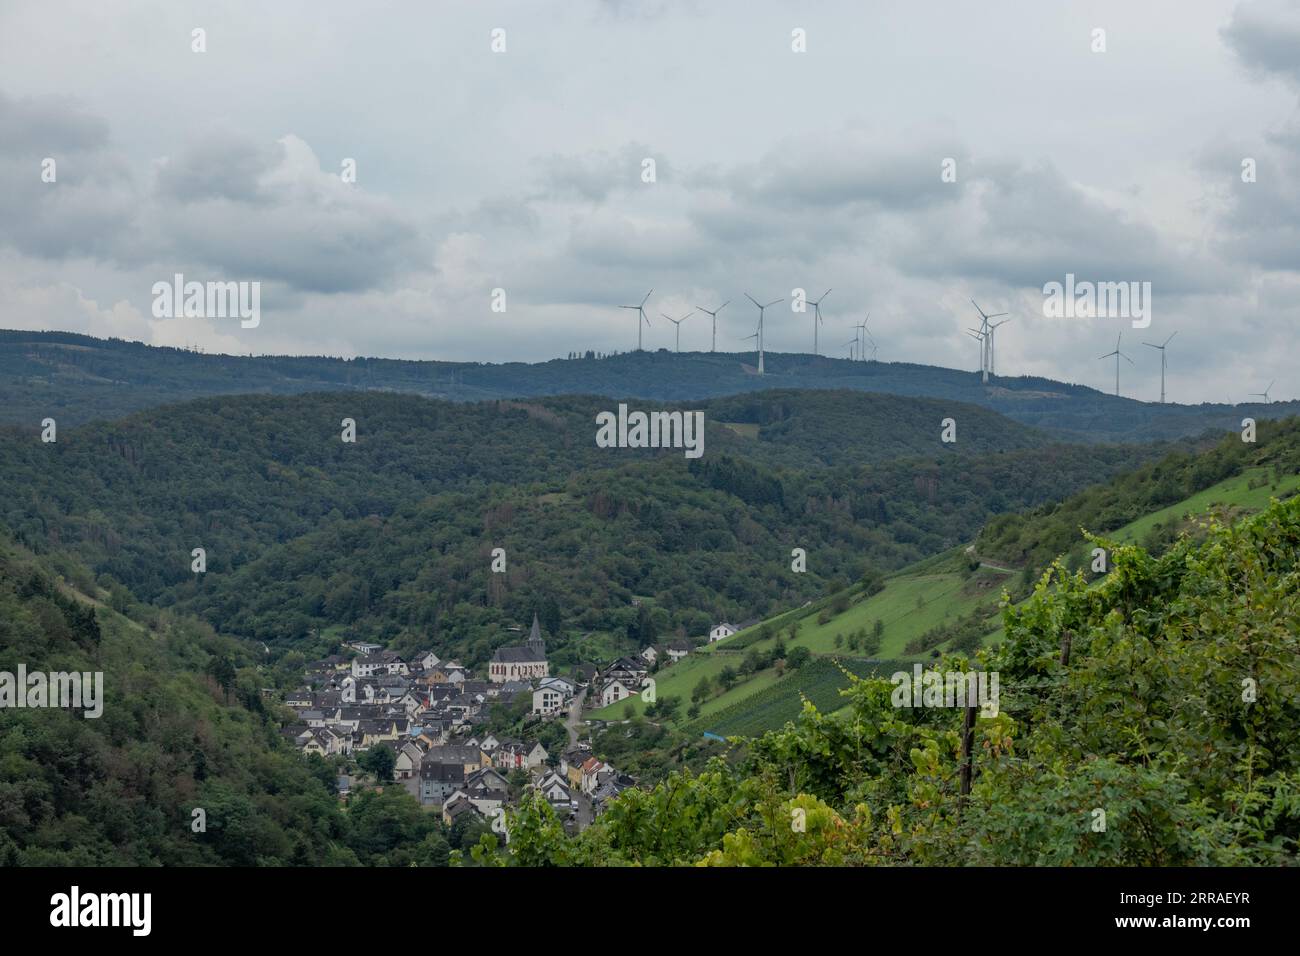 A wind farm towers over the hamlet of Steeg near Bacharach in the Rhineland, Germany Stock Photo